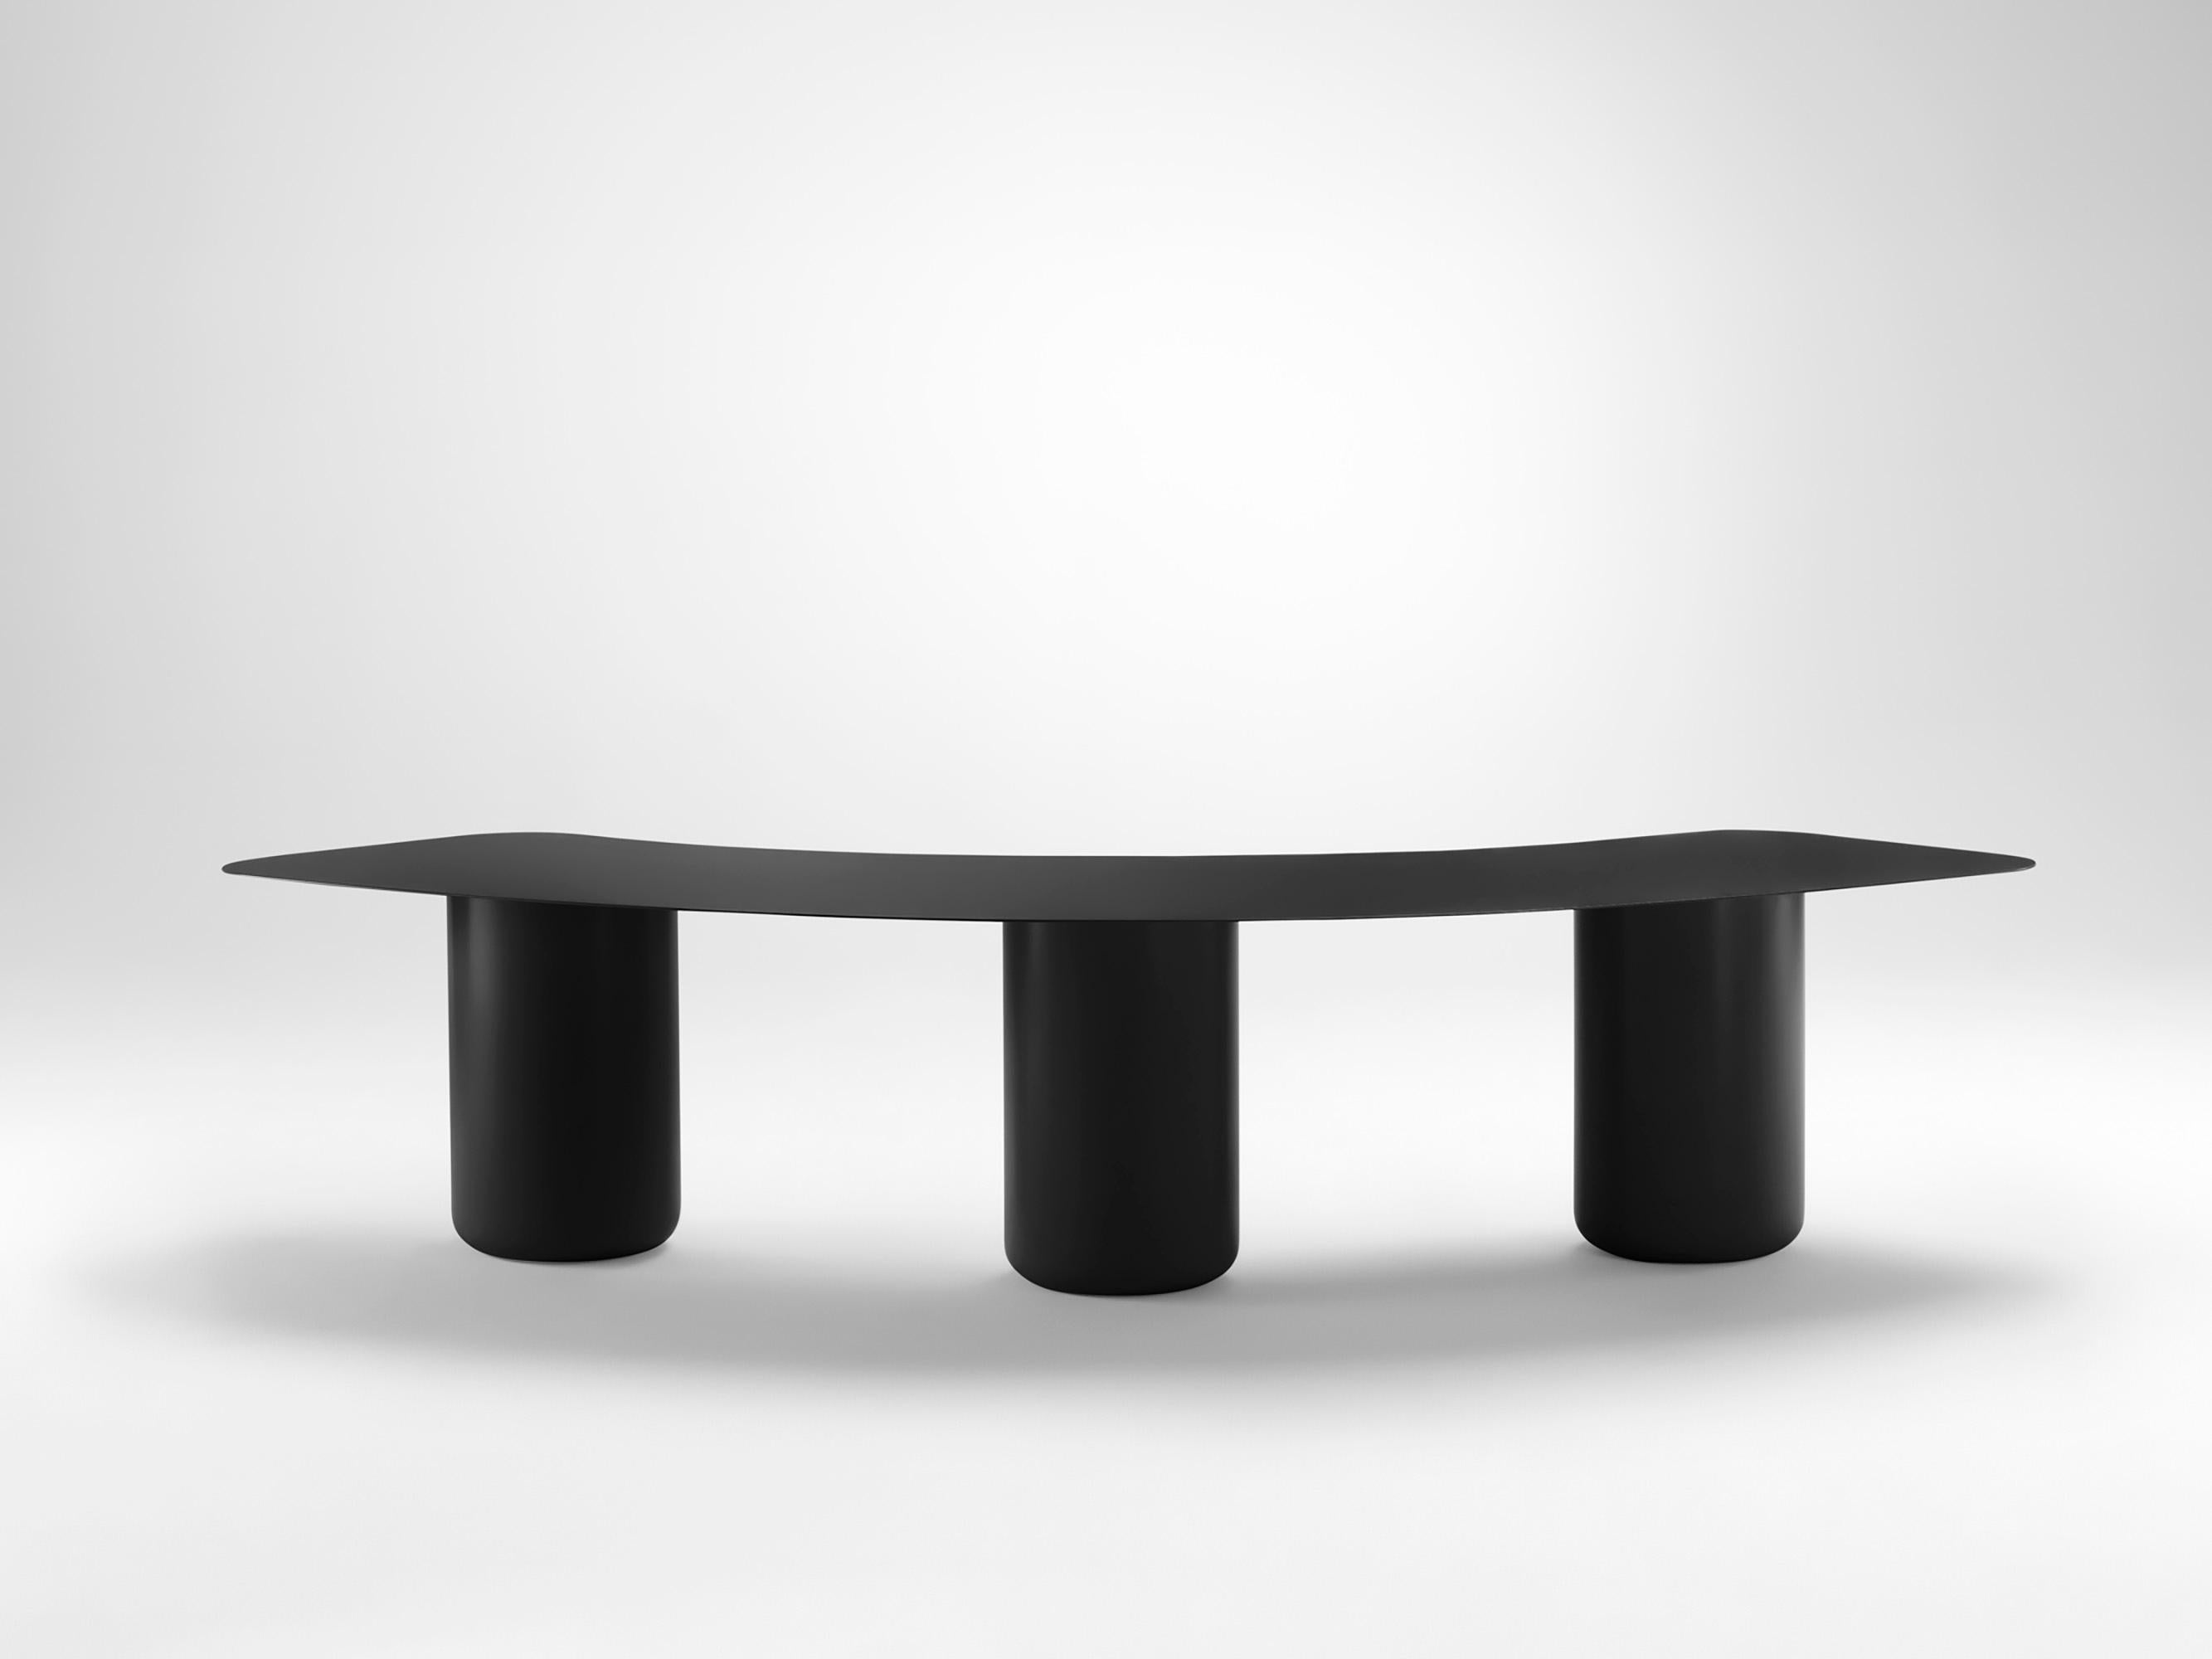 Small Black Curved Bench by Coco Flip
Dimensions: D 65 x W 165 x H 42 cm
Materials: Mild steel, powder-coated with zinc undercoat. 
Weight: 42 kg

Coco Flip is a Melbourne based furniture and lighting design studio, run by us, Kate Stokes and